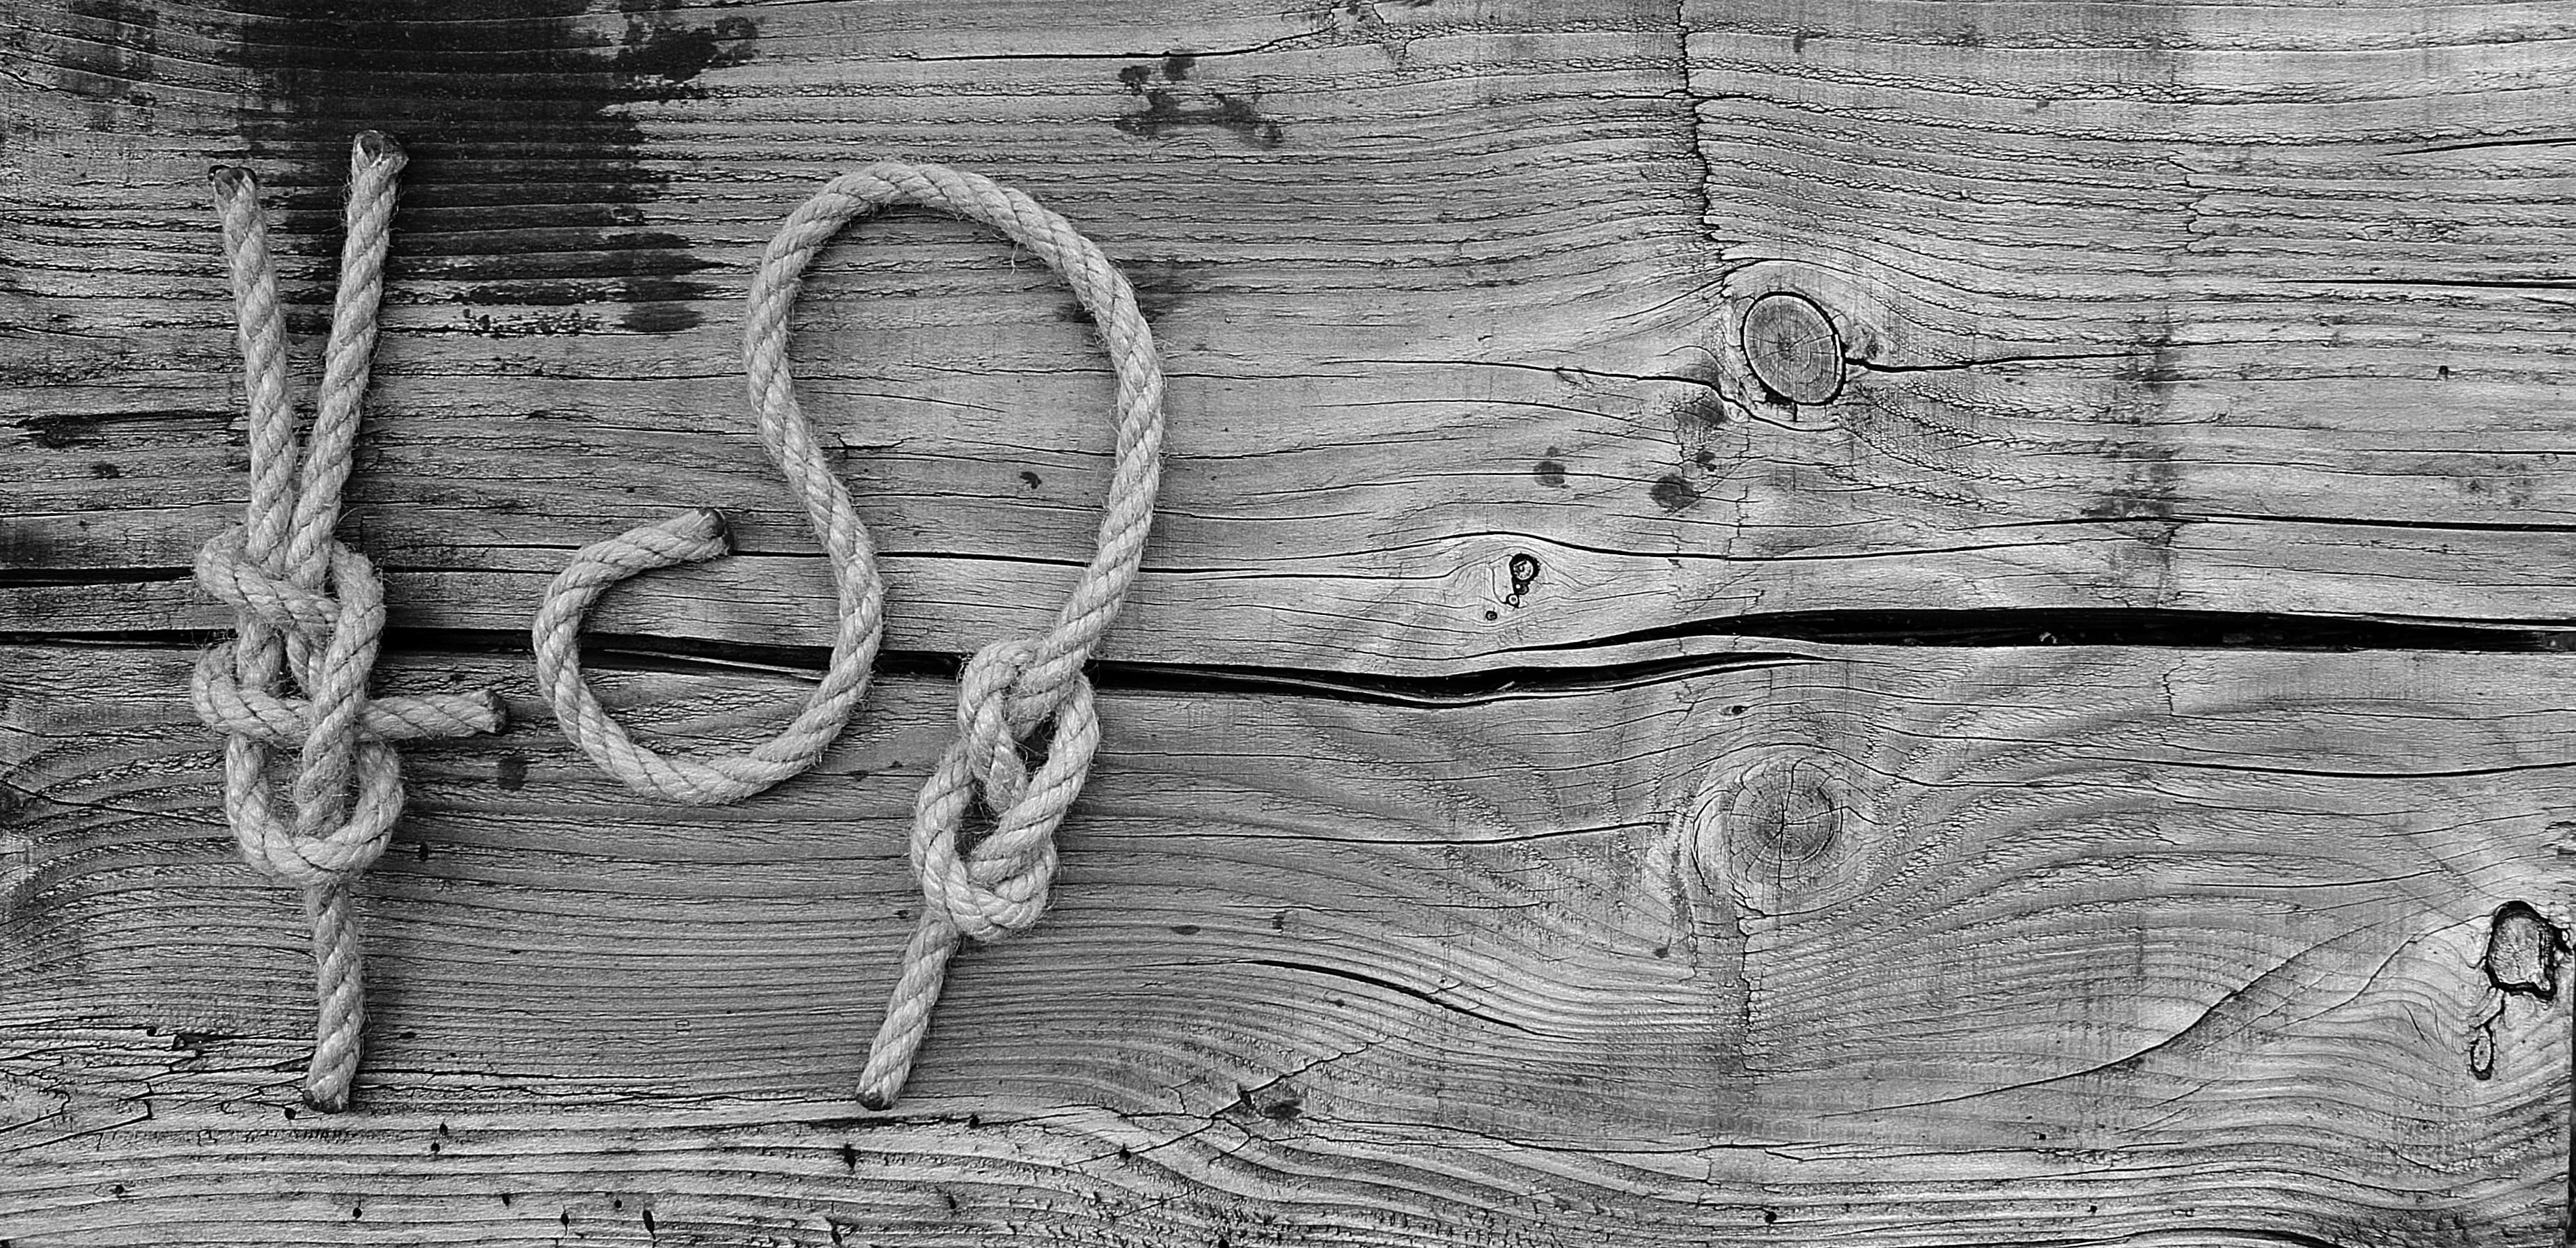 two gray ropes on wooden surface, knots, structure, maritim, wood - material